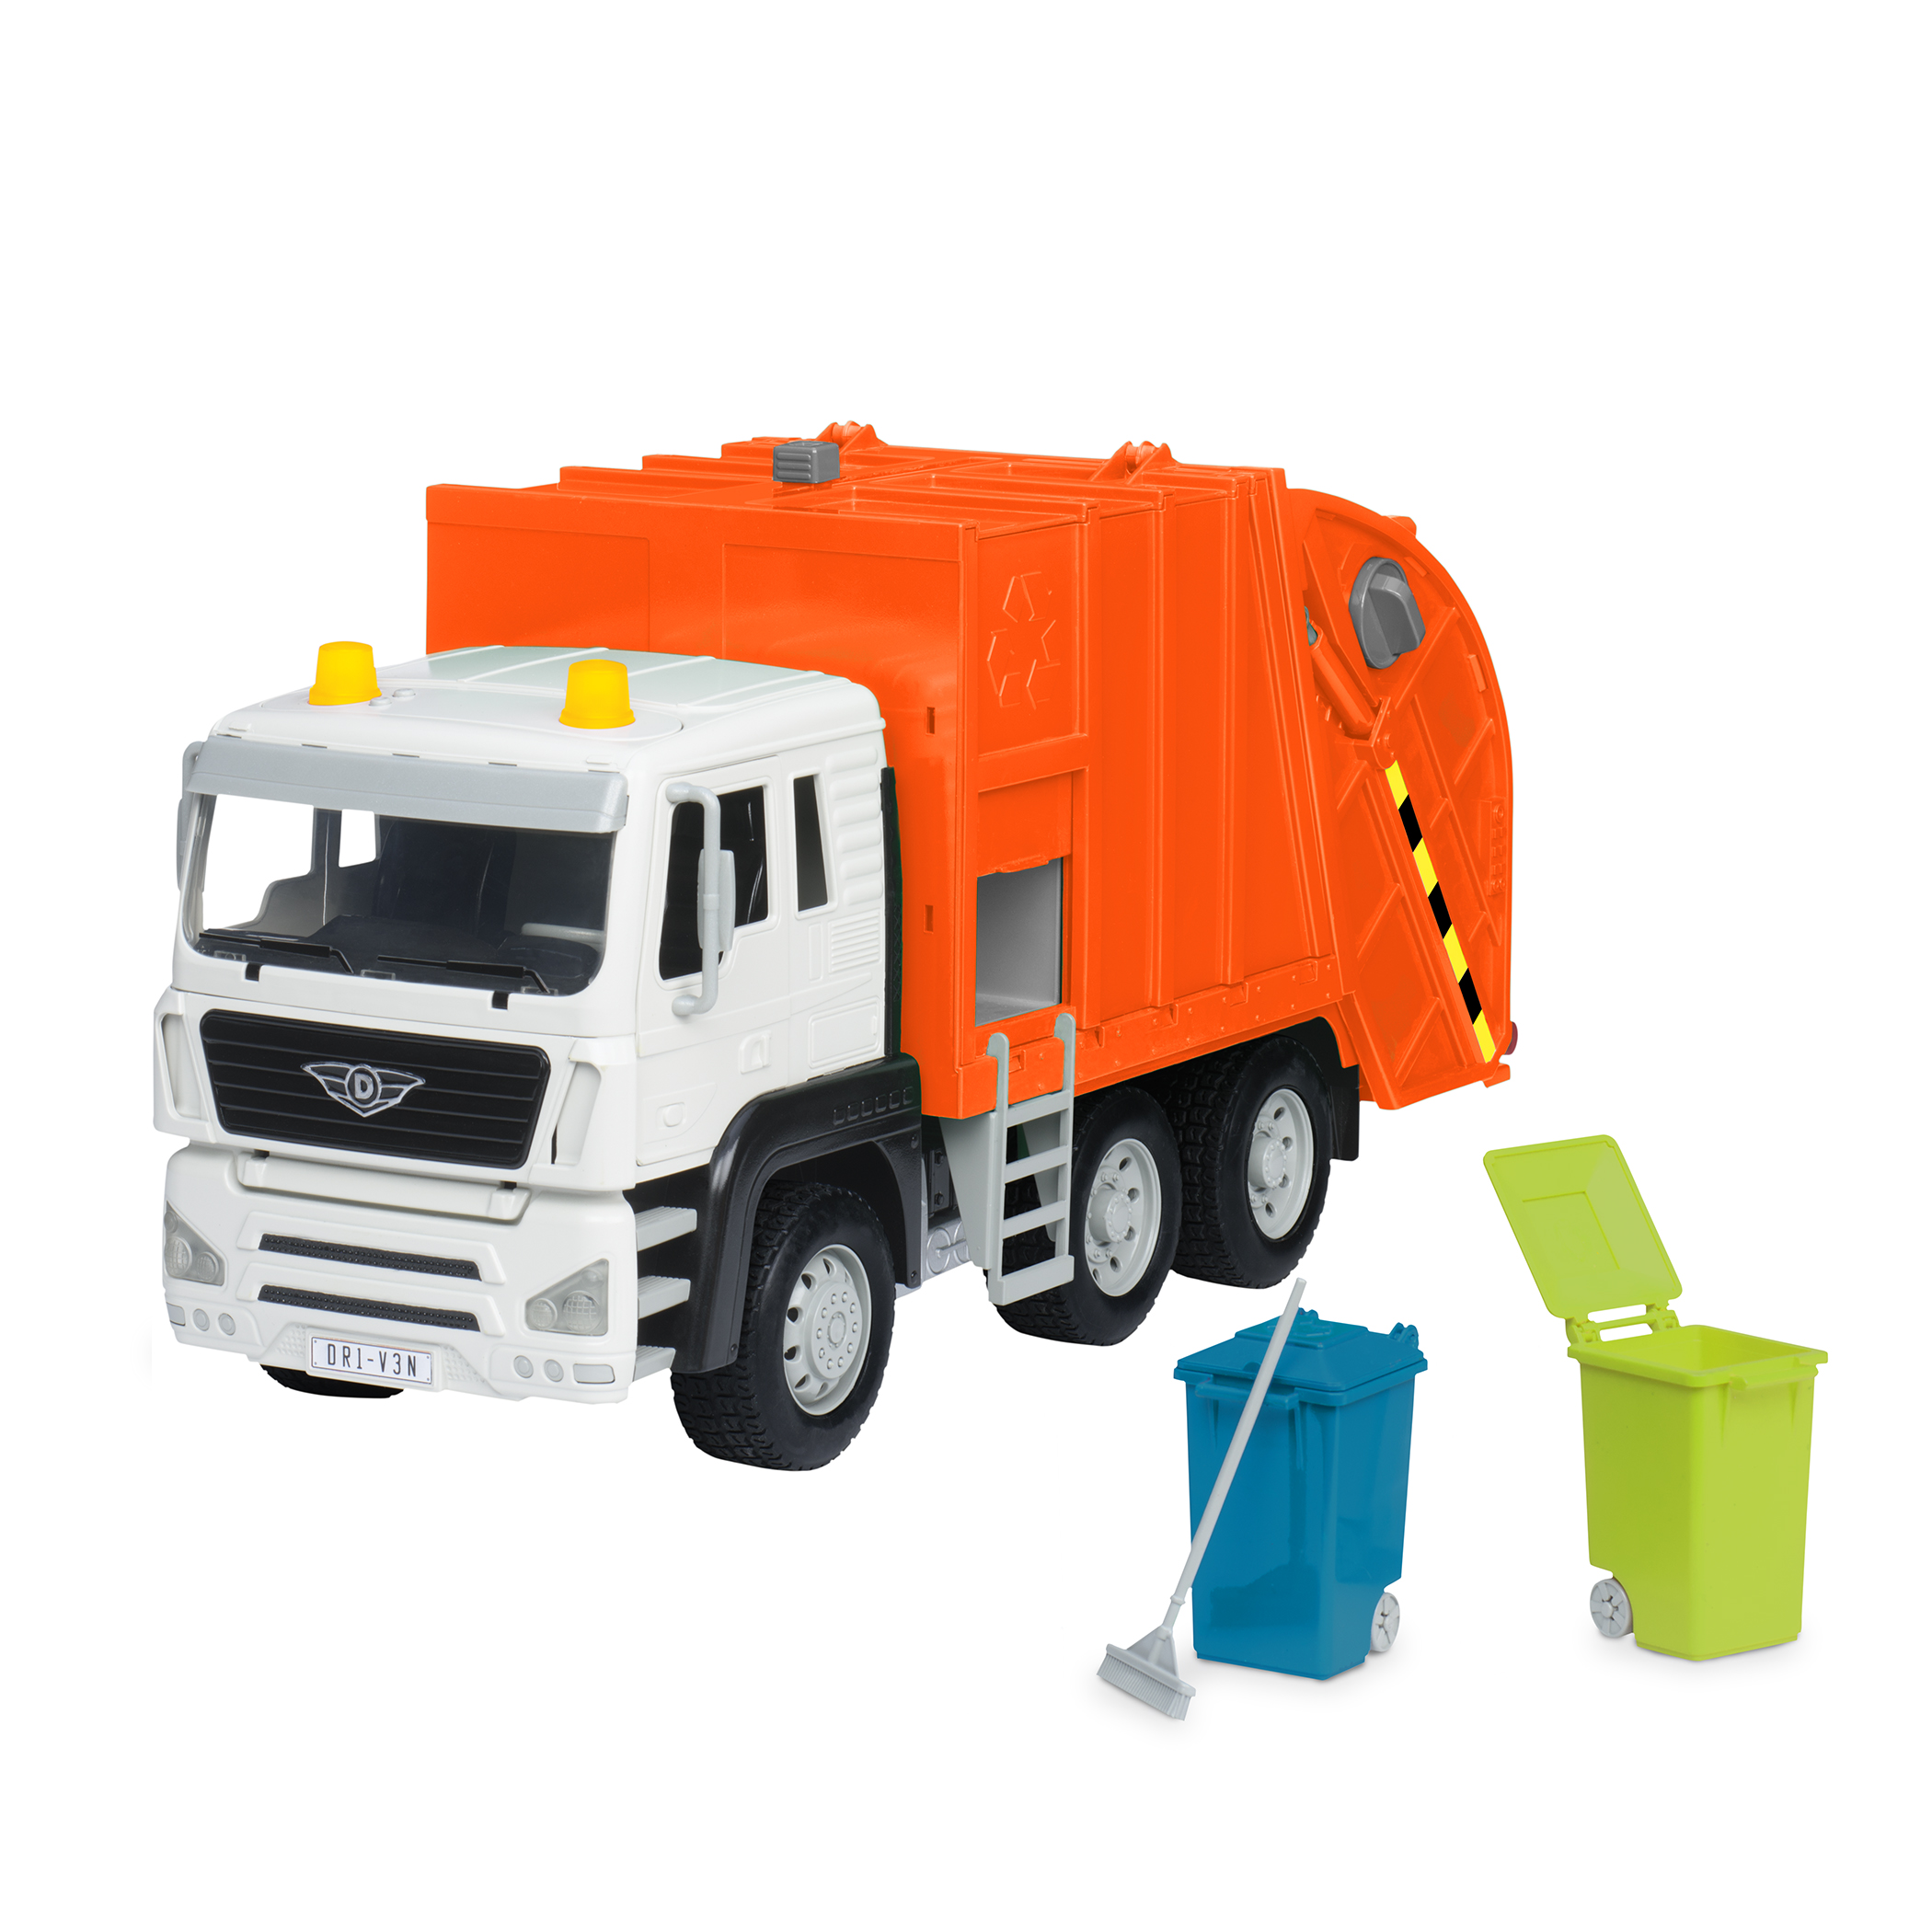 Orange Recycling Truck  Toy Trucks & Construction Toys for Kids